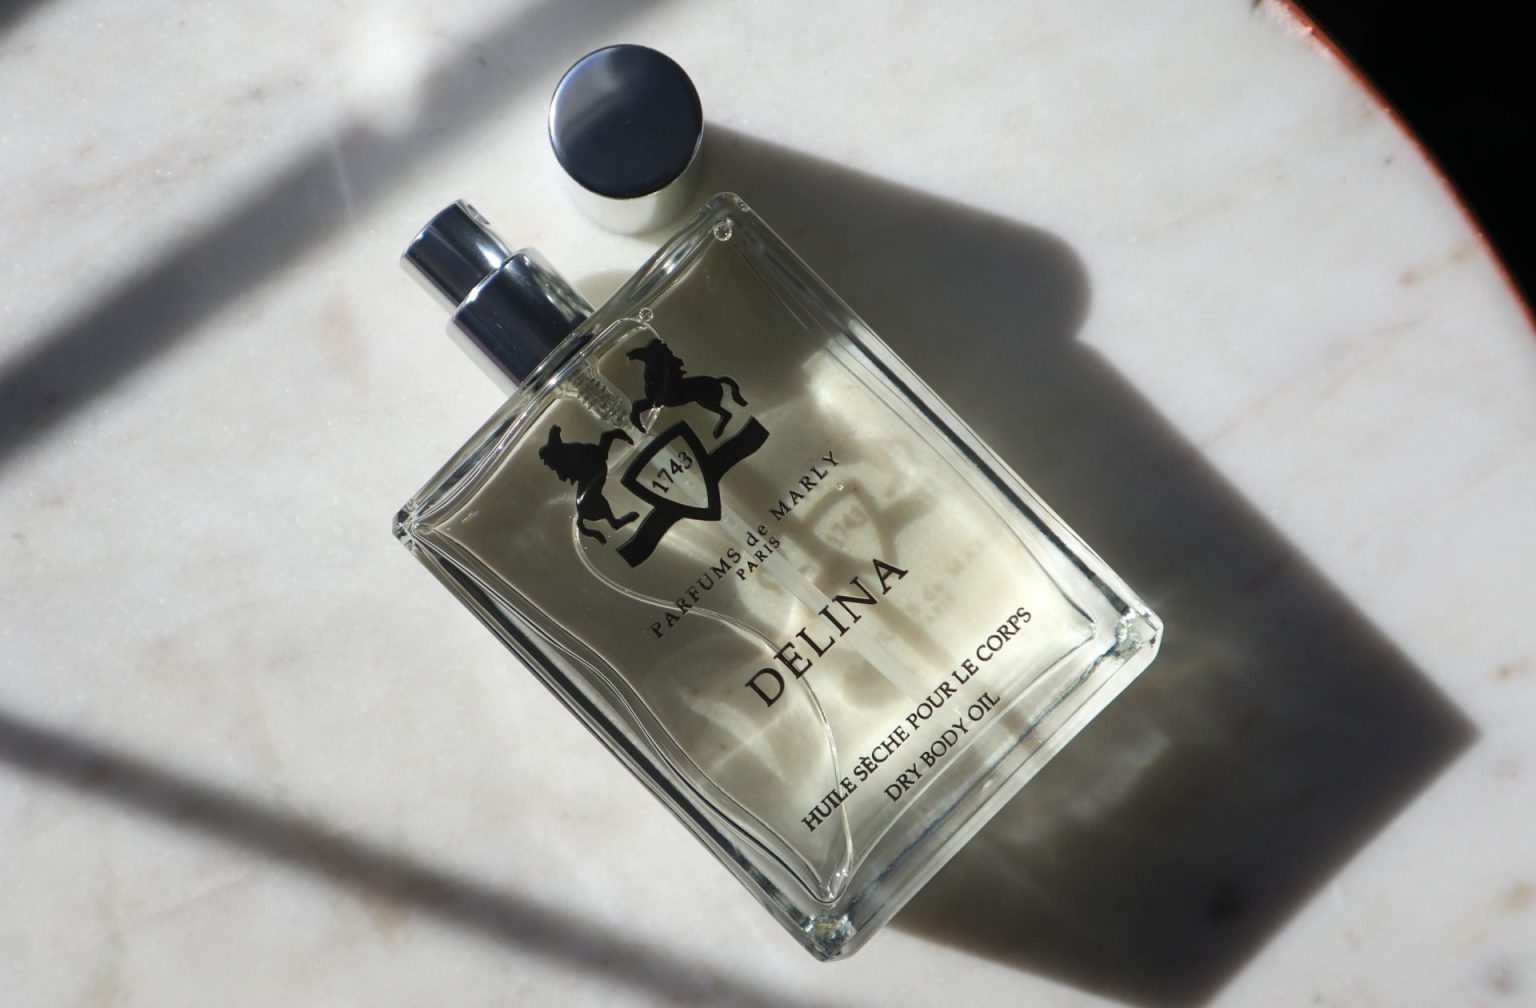 Parfums de Marly Delina Body Oil Review - The Velvet Life